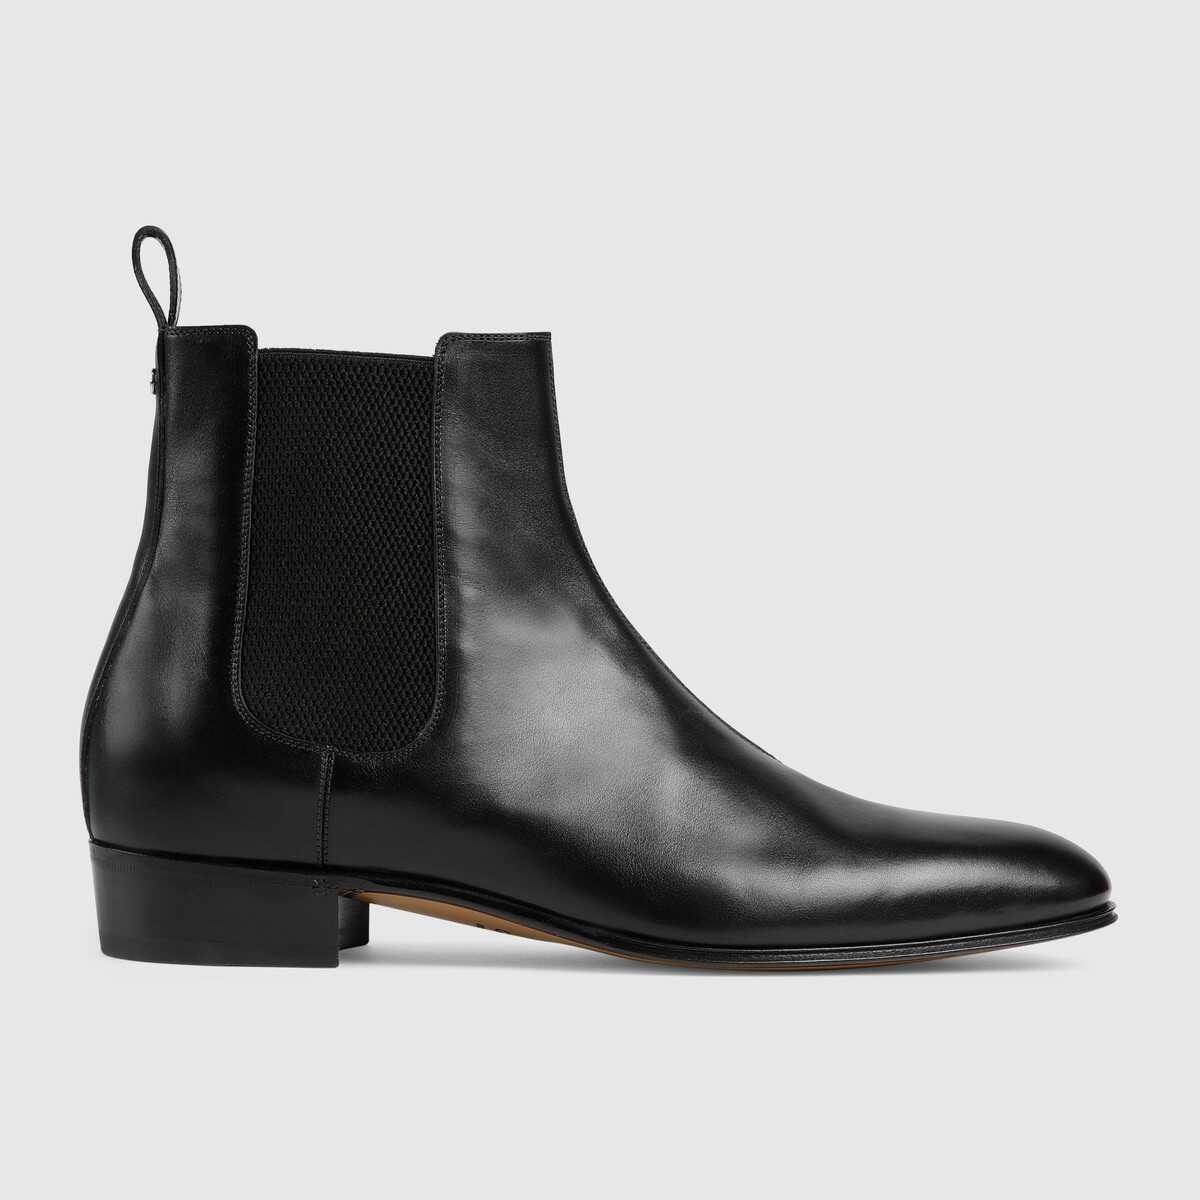 Men's ankle boot - 1